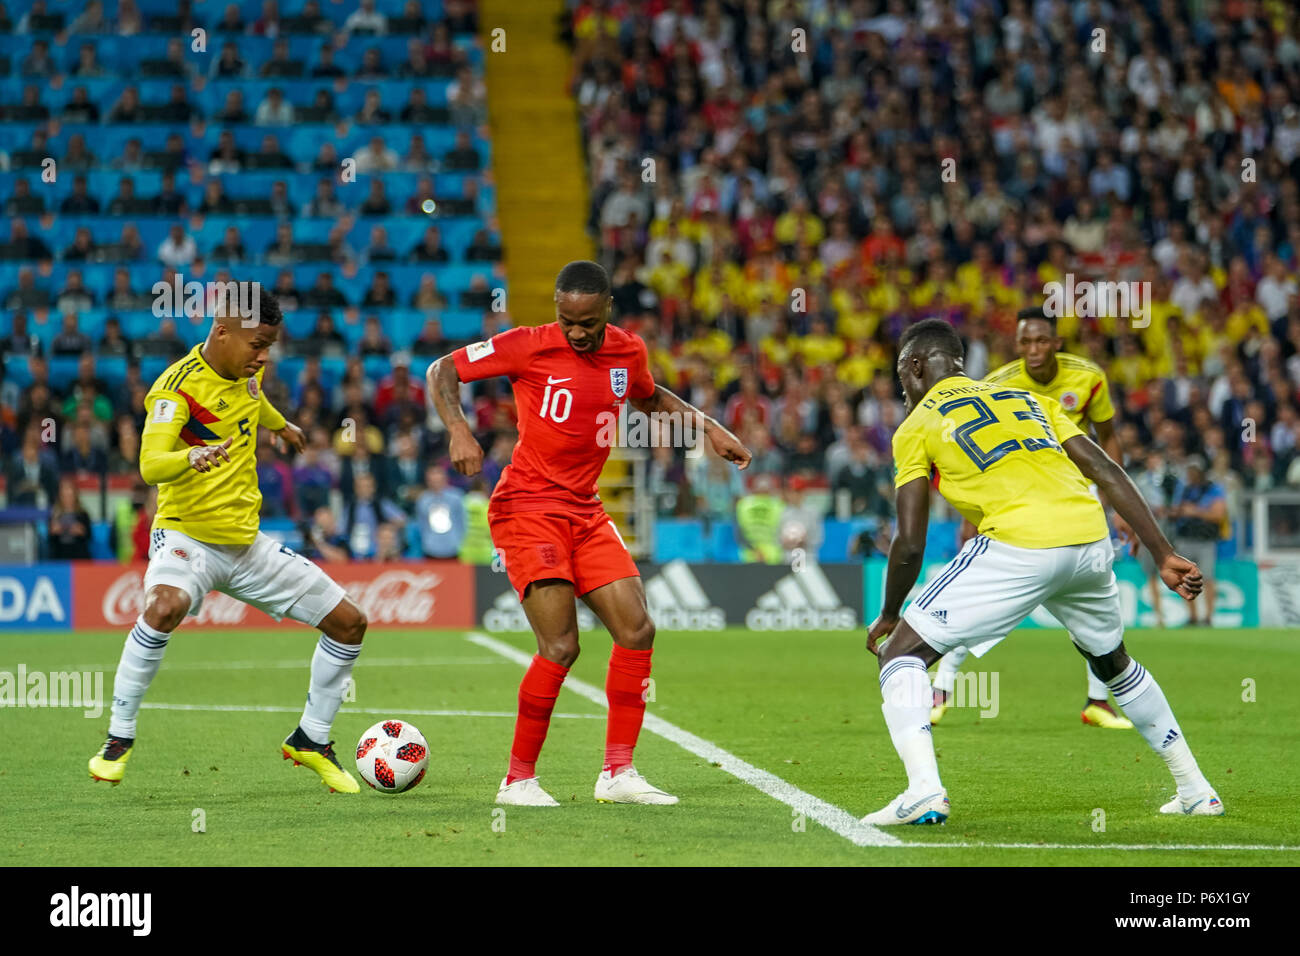 Moscow, Russia. July 03, 2018: Raheem Sterling of England making a heal kick between the legs of Wilmar Barrios of Colombia.at Spartak Stadium during the round of 16 match between England and Colombia during the 2018 World Cup. Ulrik Pedersen/CSM Credit: Cal Sport Media/Alamy Live News Stock Photo